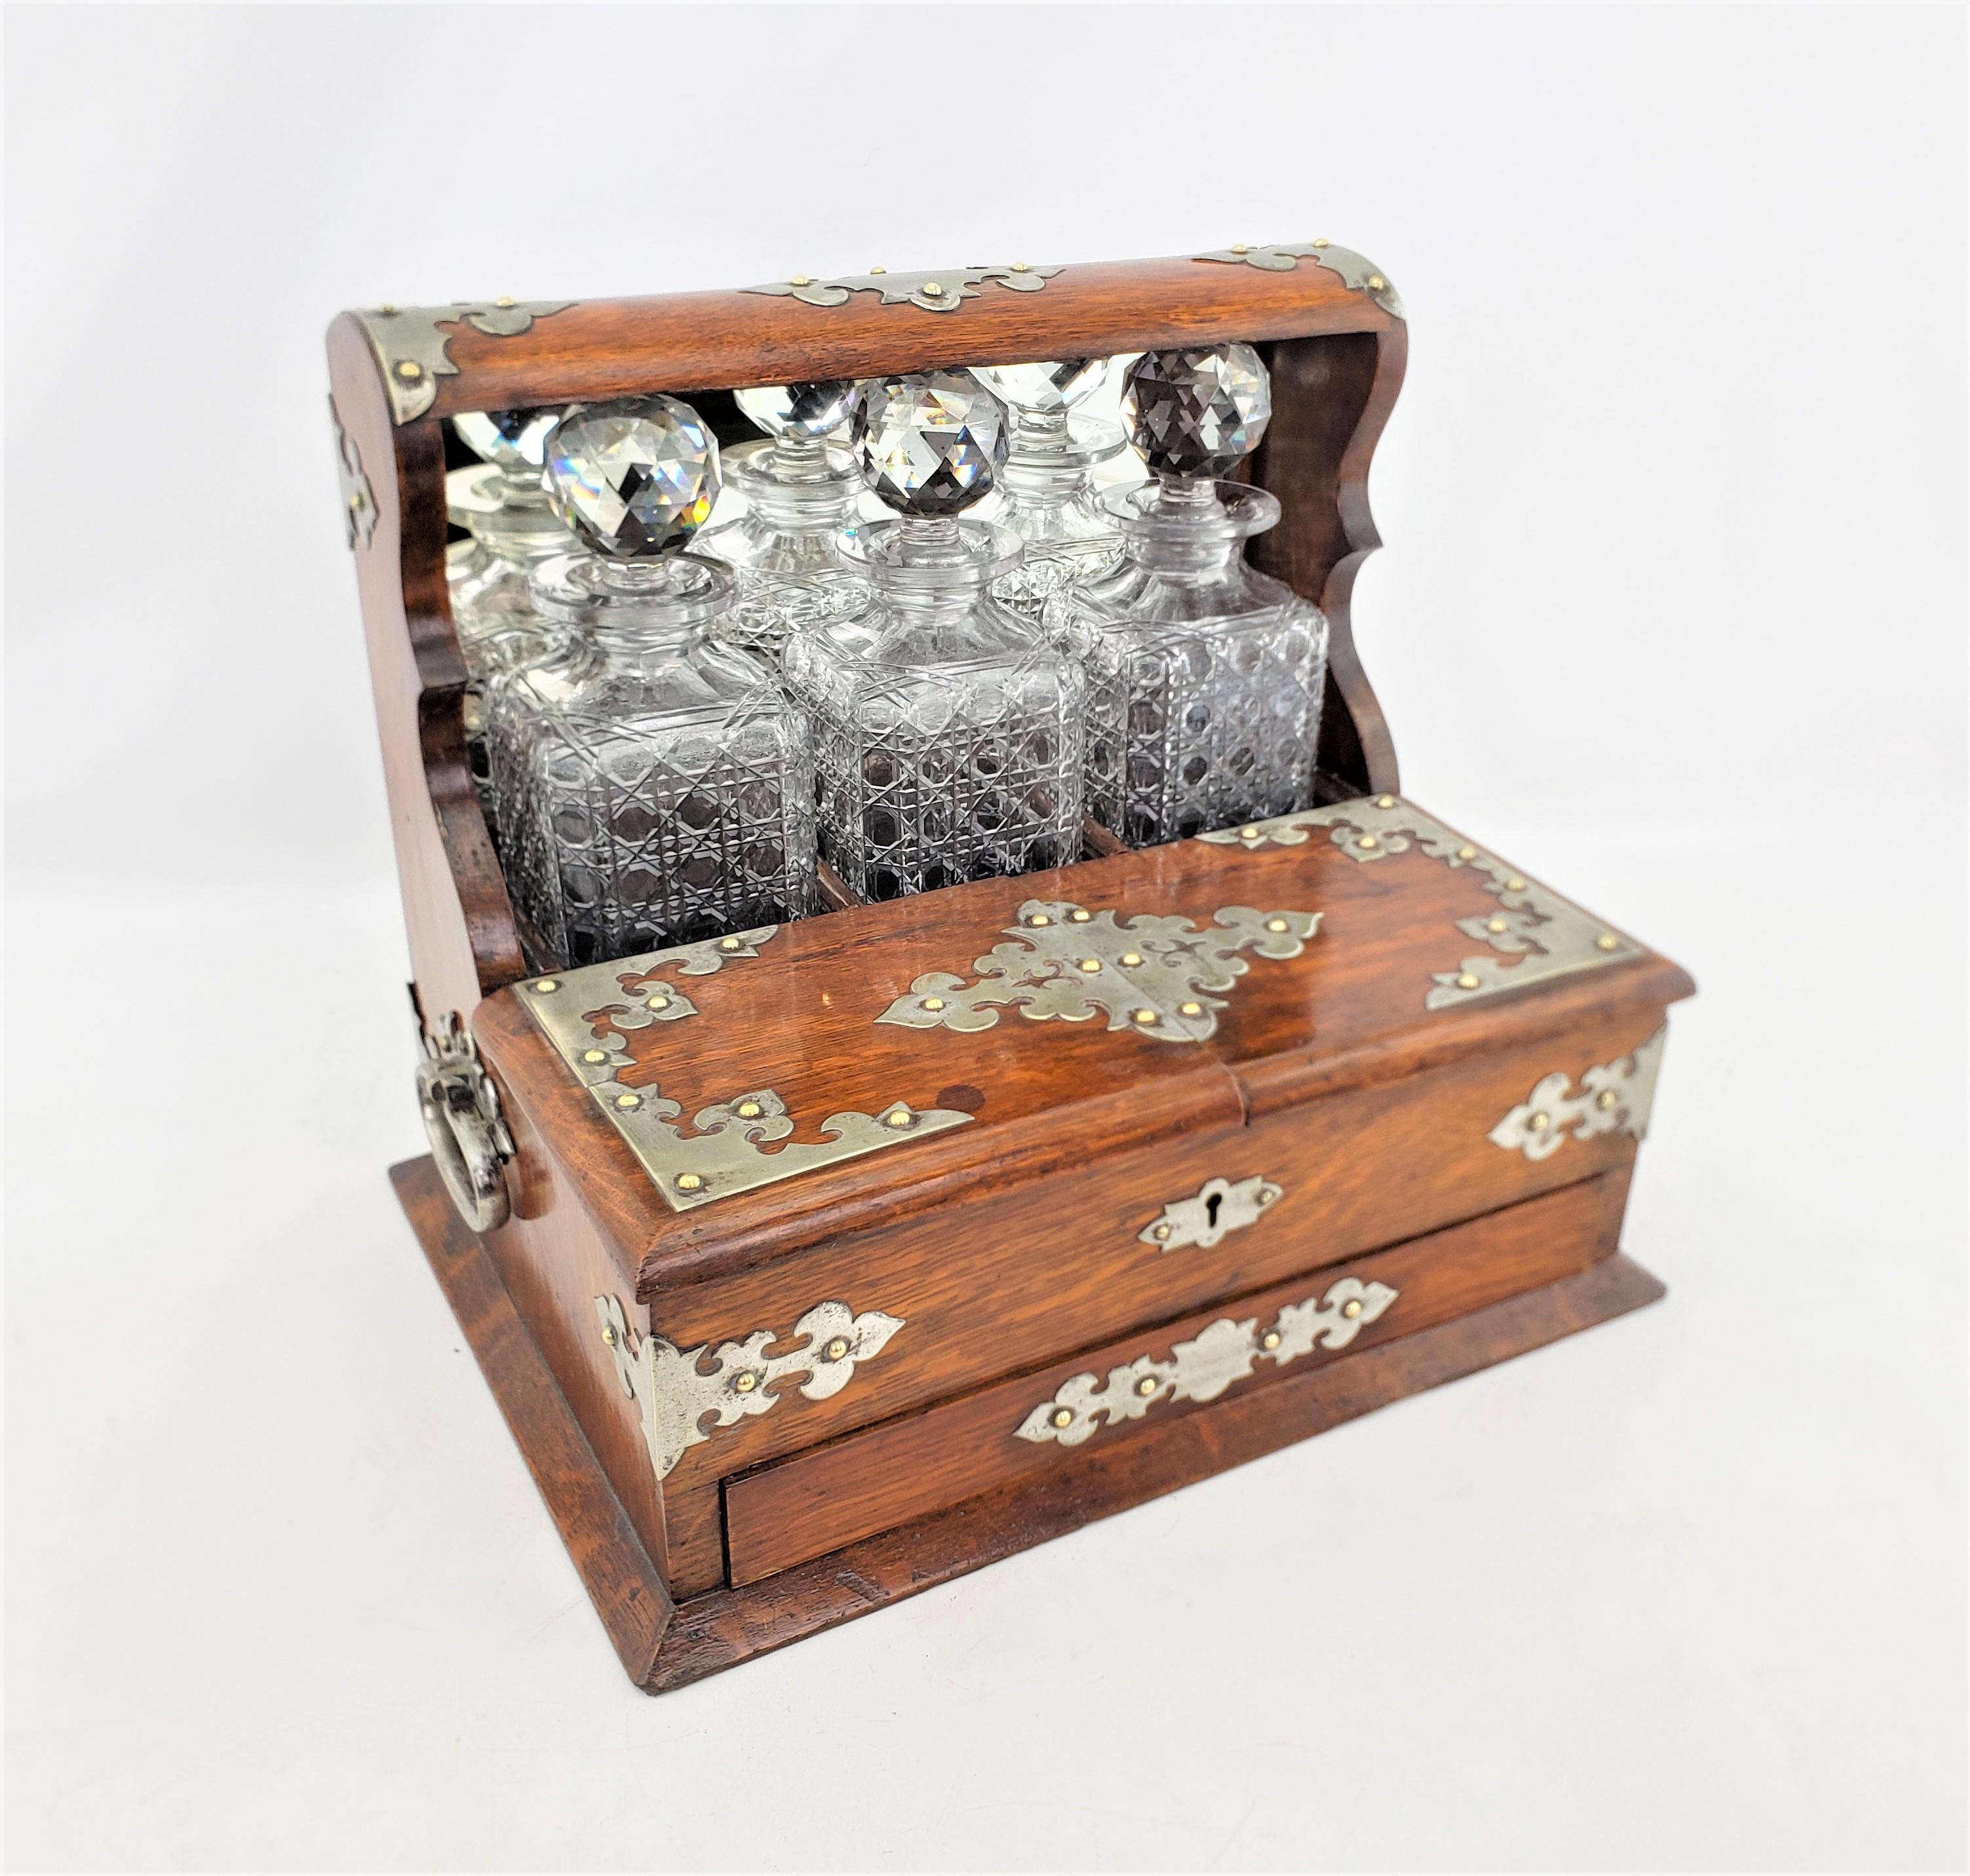 This antique tantalus is unsigned, but presumed to have originated from England and date to approximately 1880 and done in the period Victorian style. The tantalus with composed of oak with elaborate pierced and silver plated mounts, with three cut